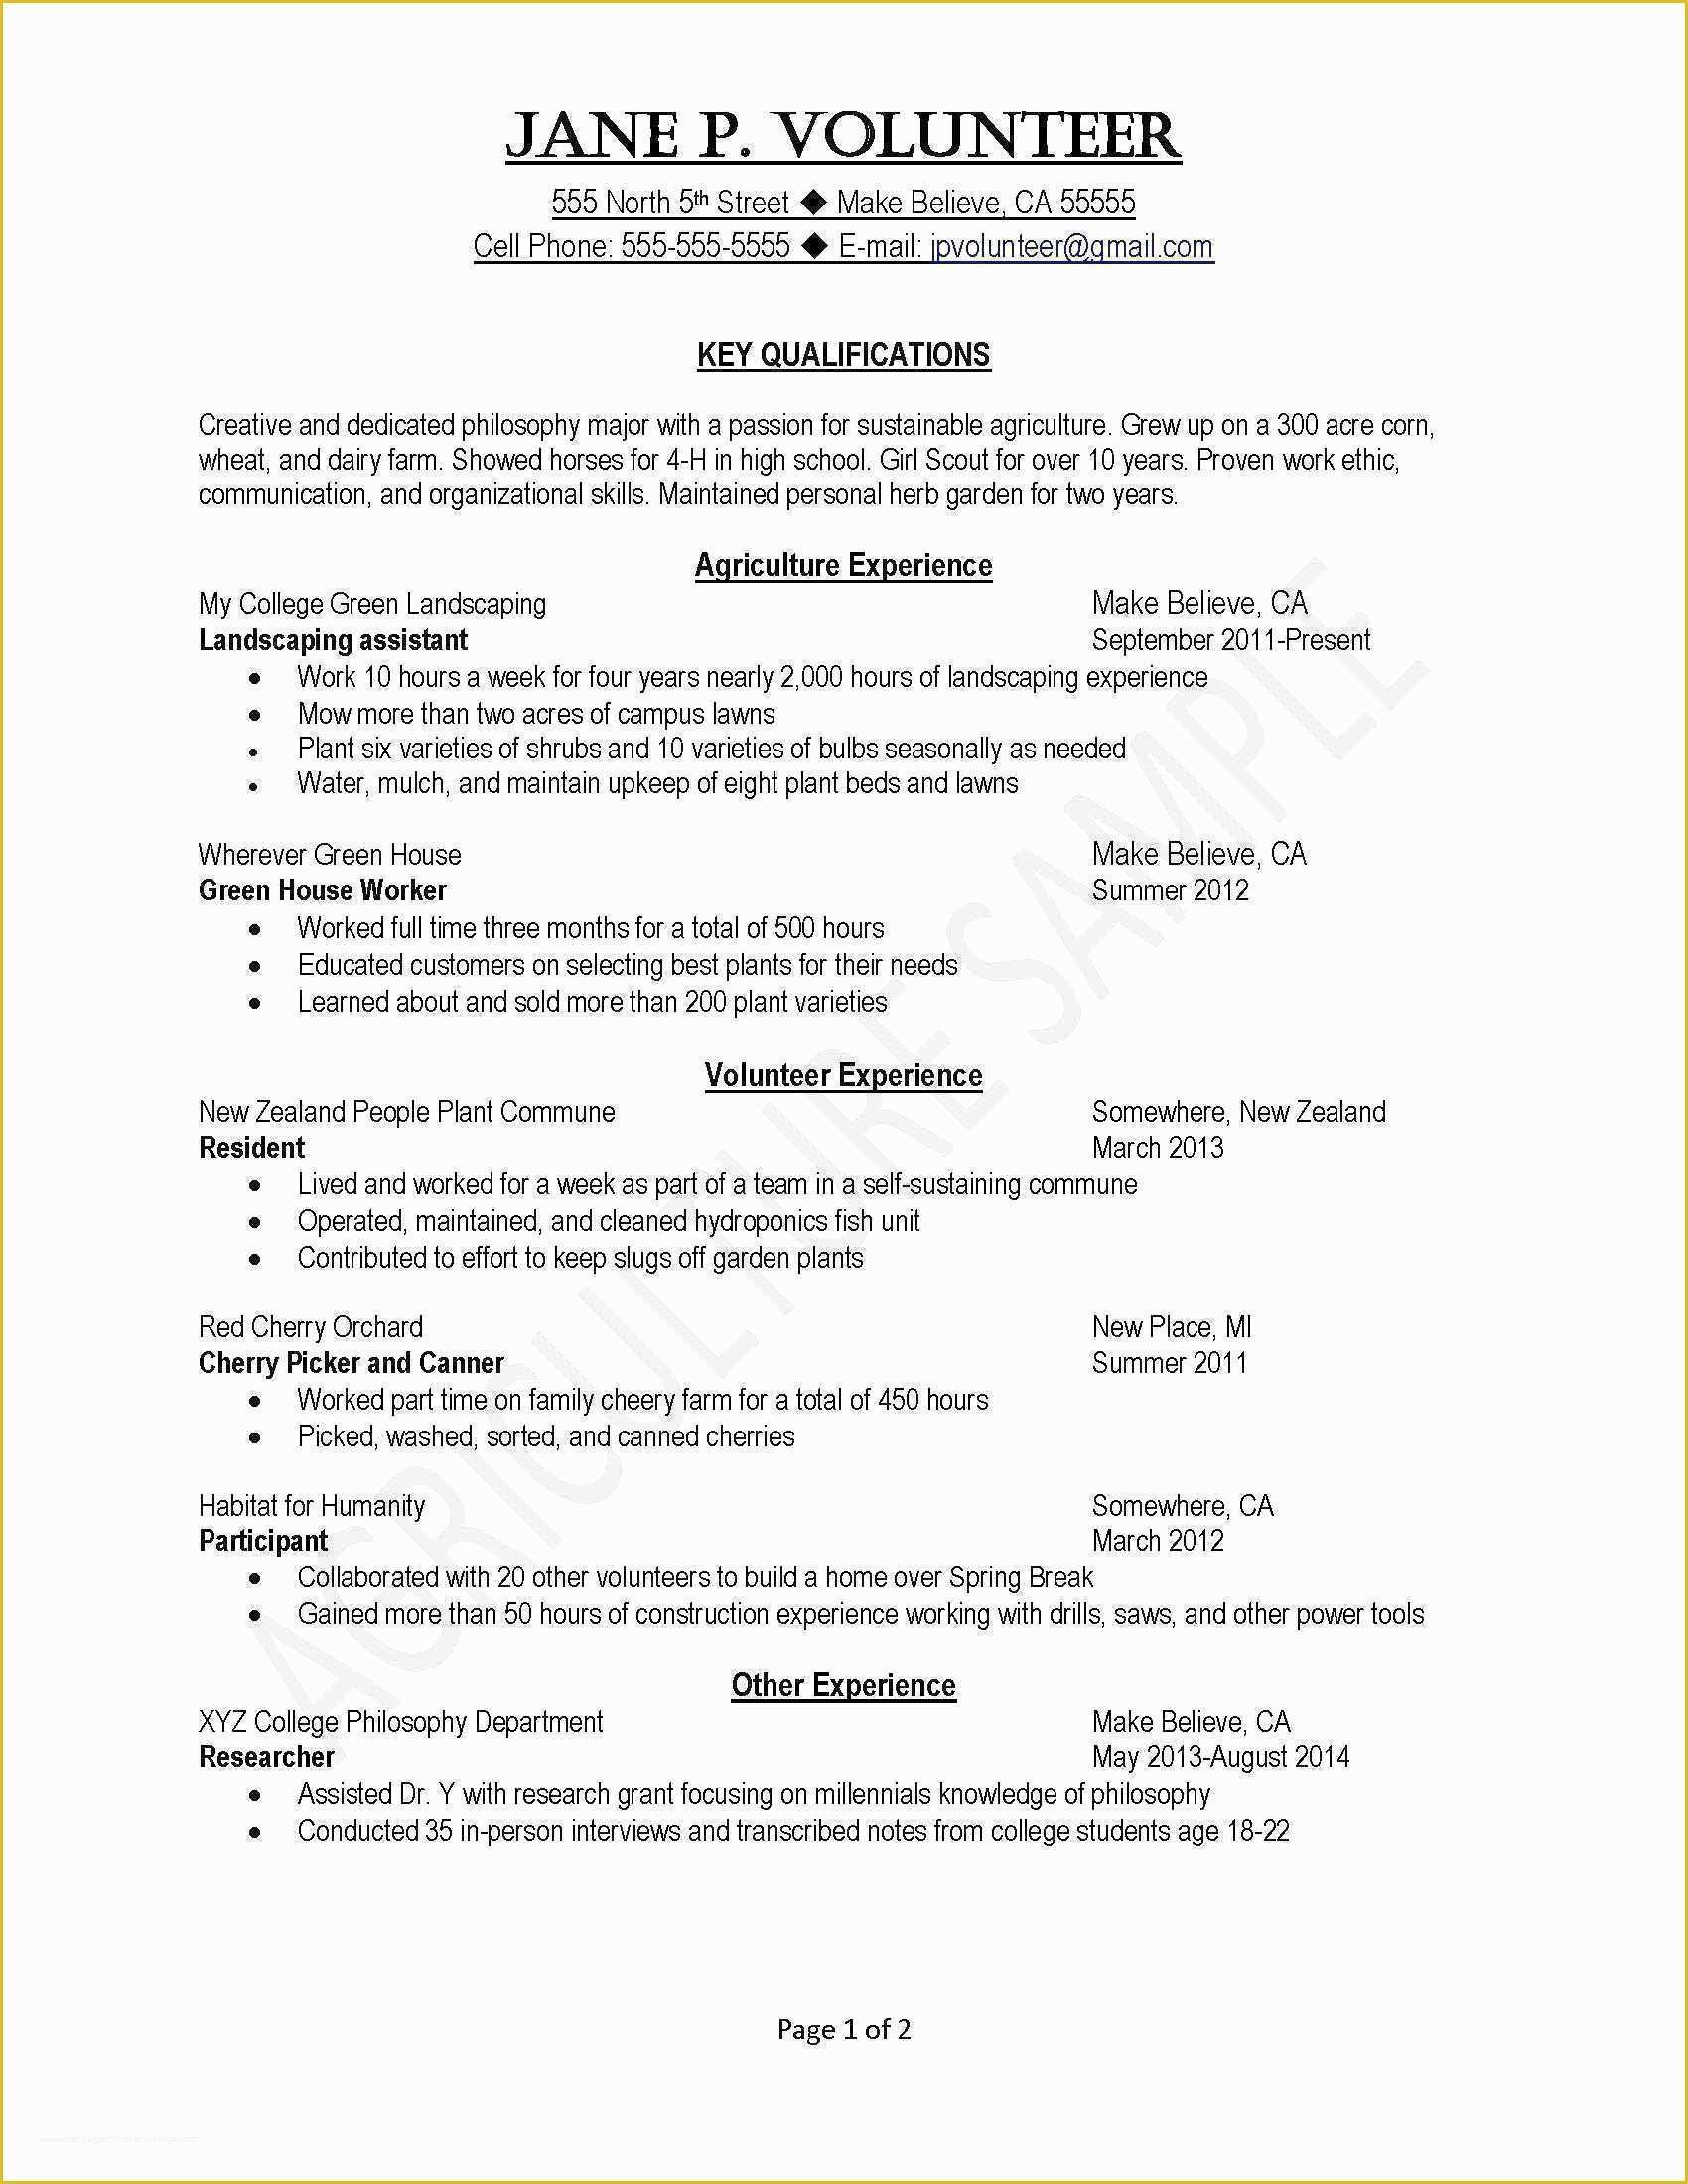 Oil and Gas Resume Samples Pdf Free Oil and Gas Resume Templates Oil and Gas Resumes